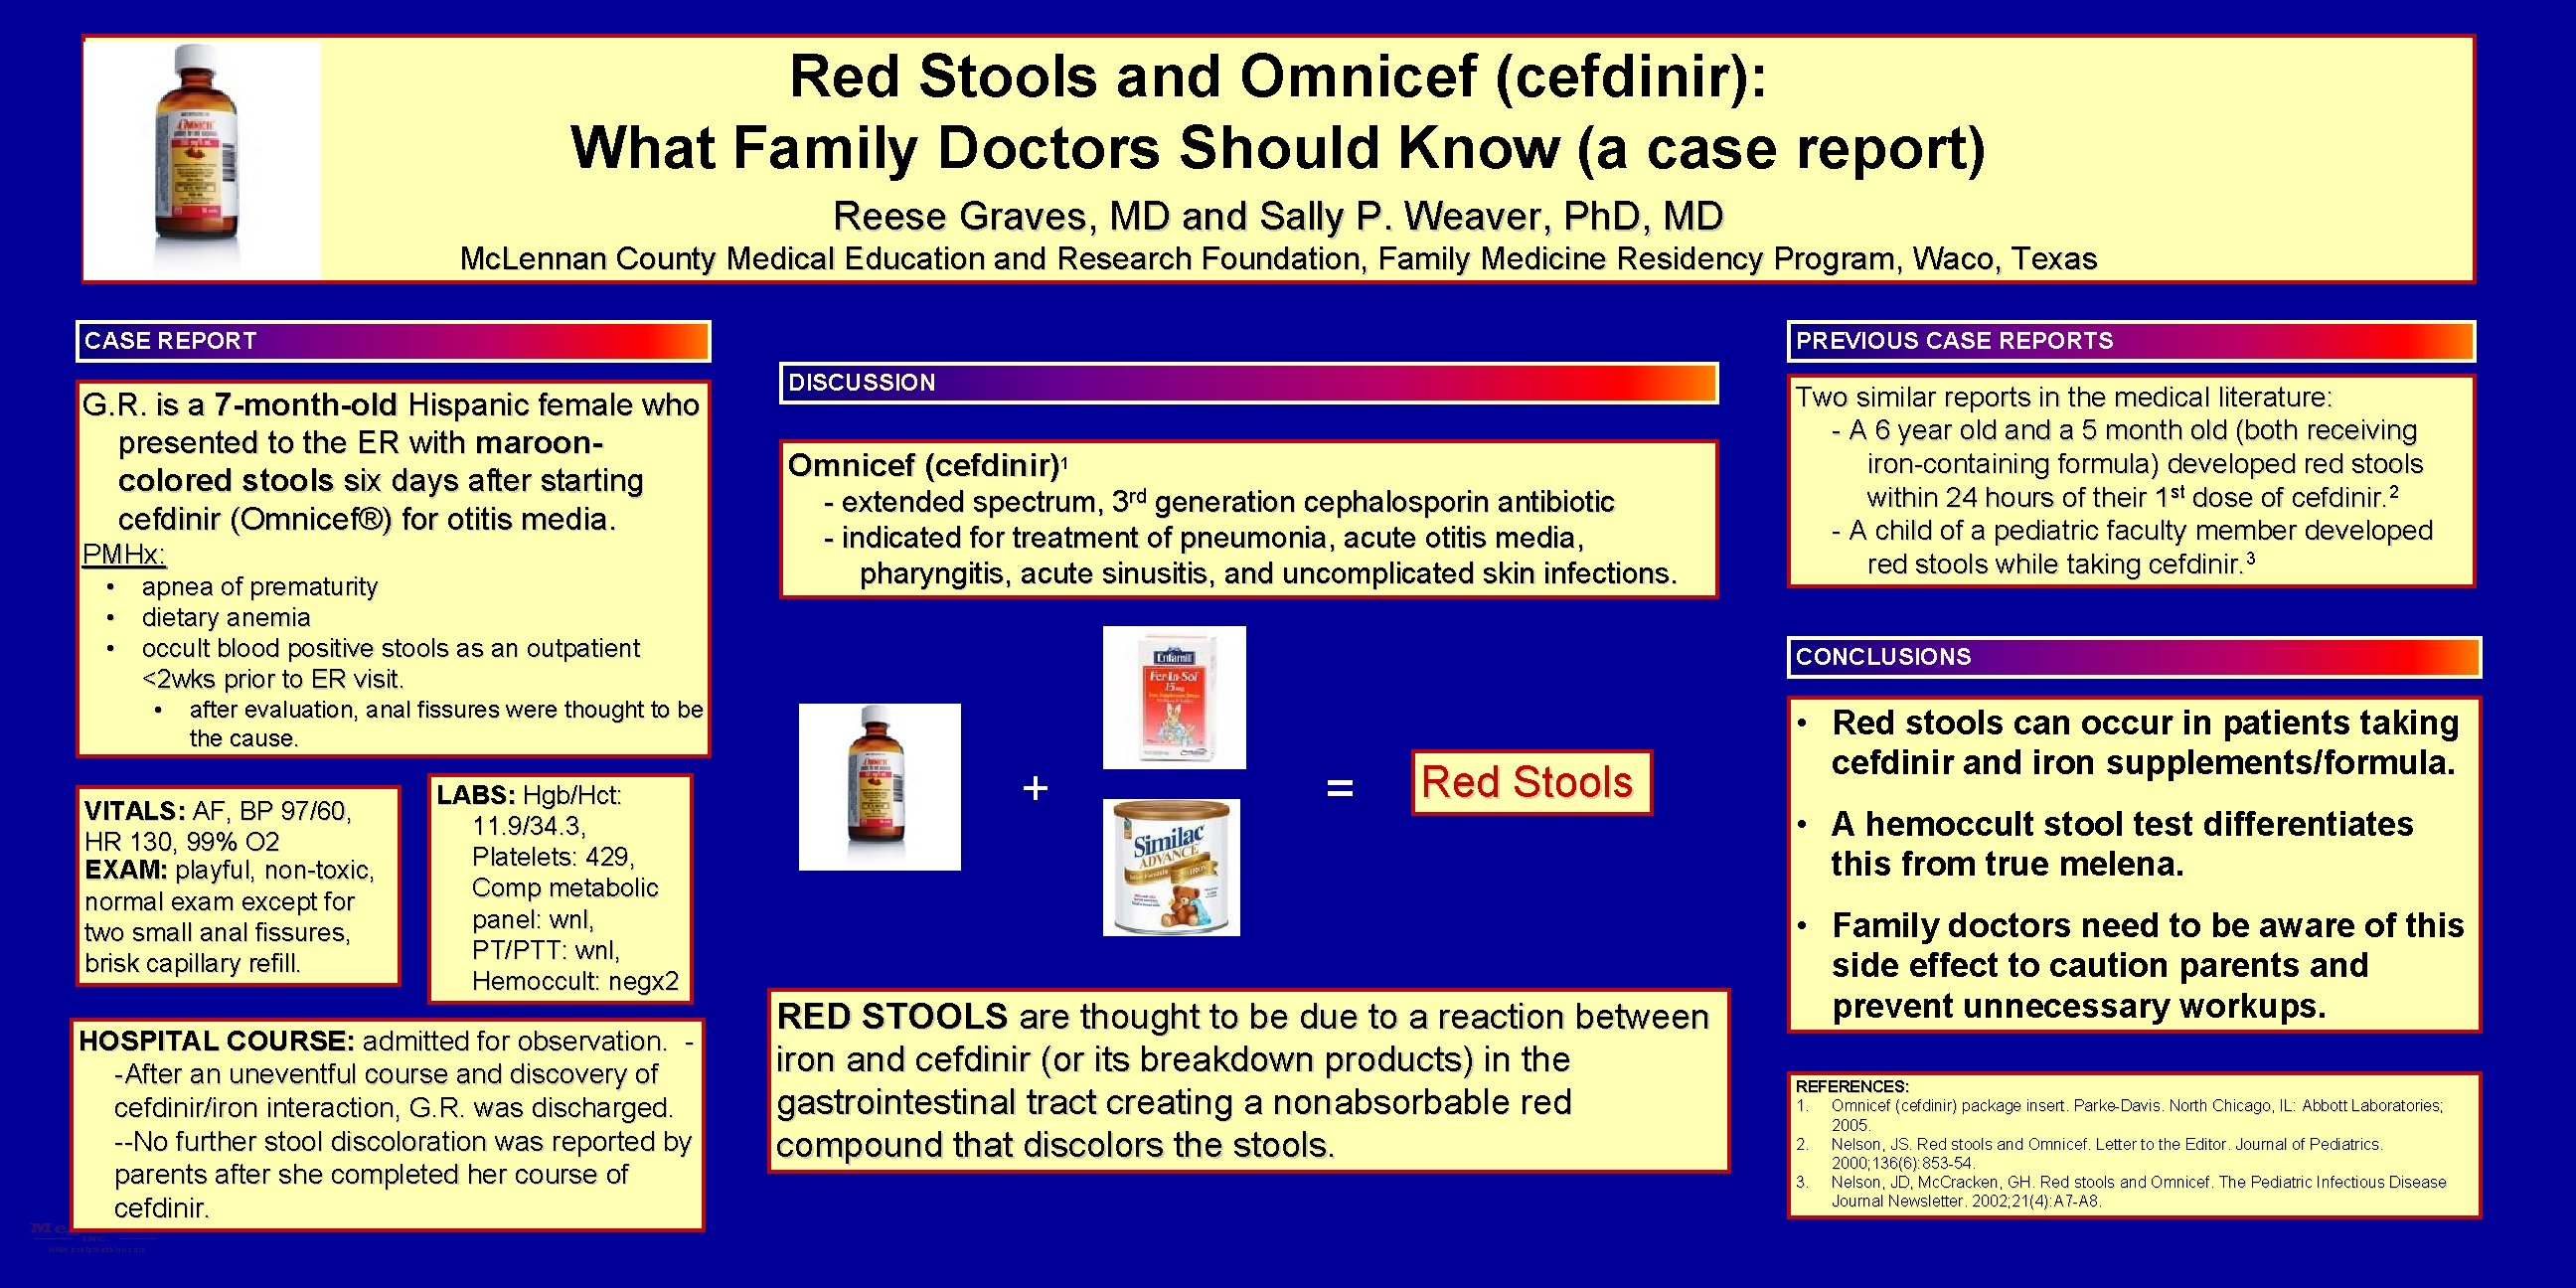 Red Stools and Omnicef (cefdinir): What Family Doctors Should Know (a case report) Reese